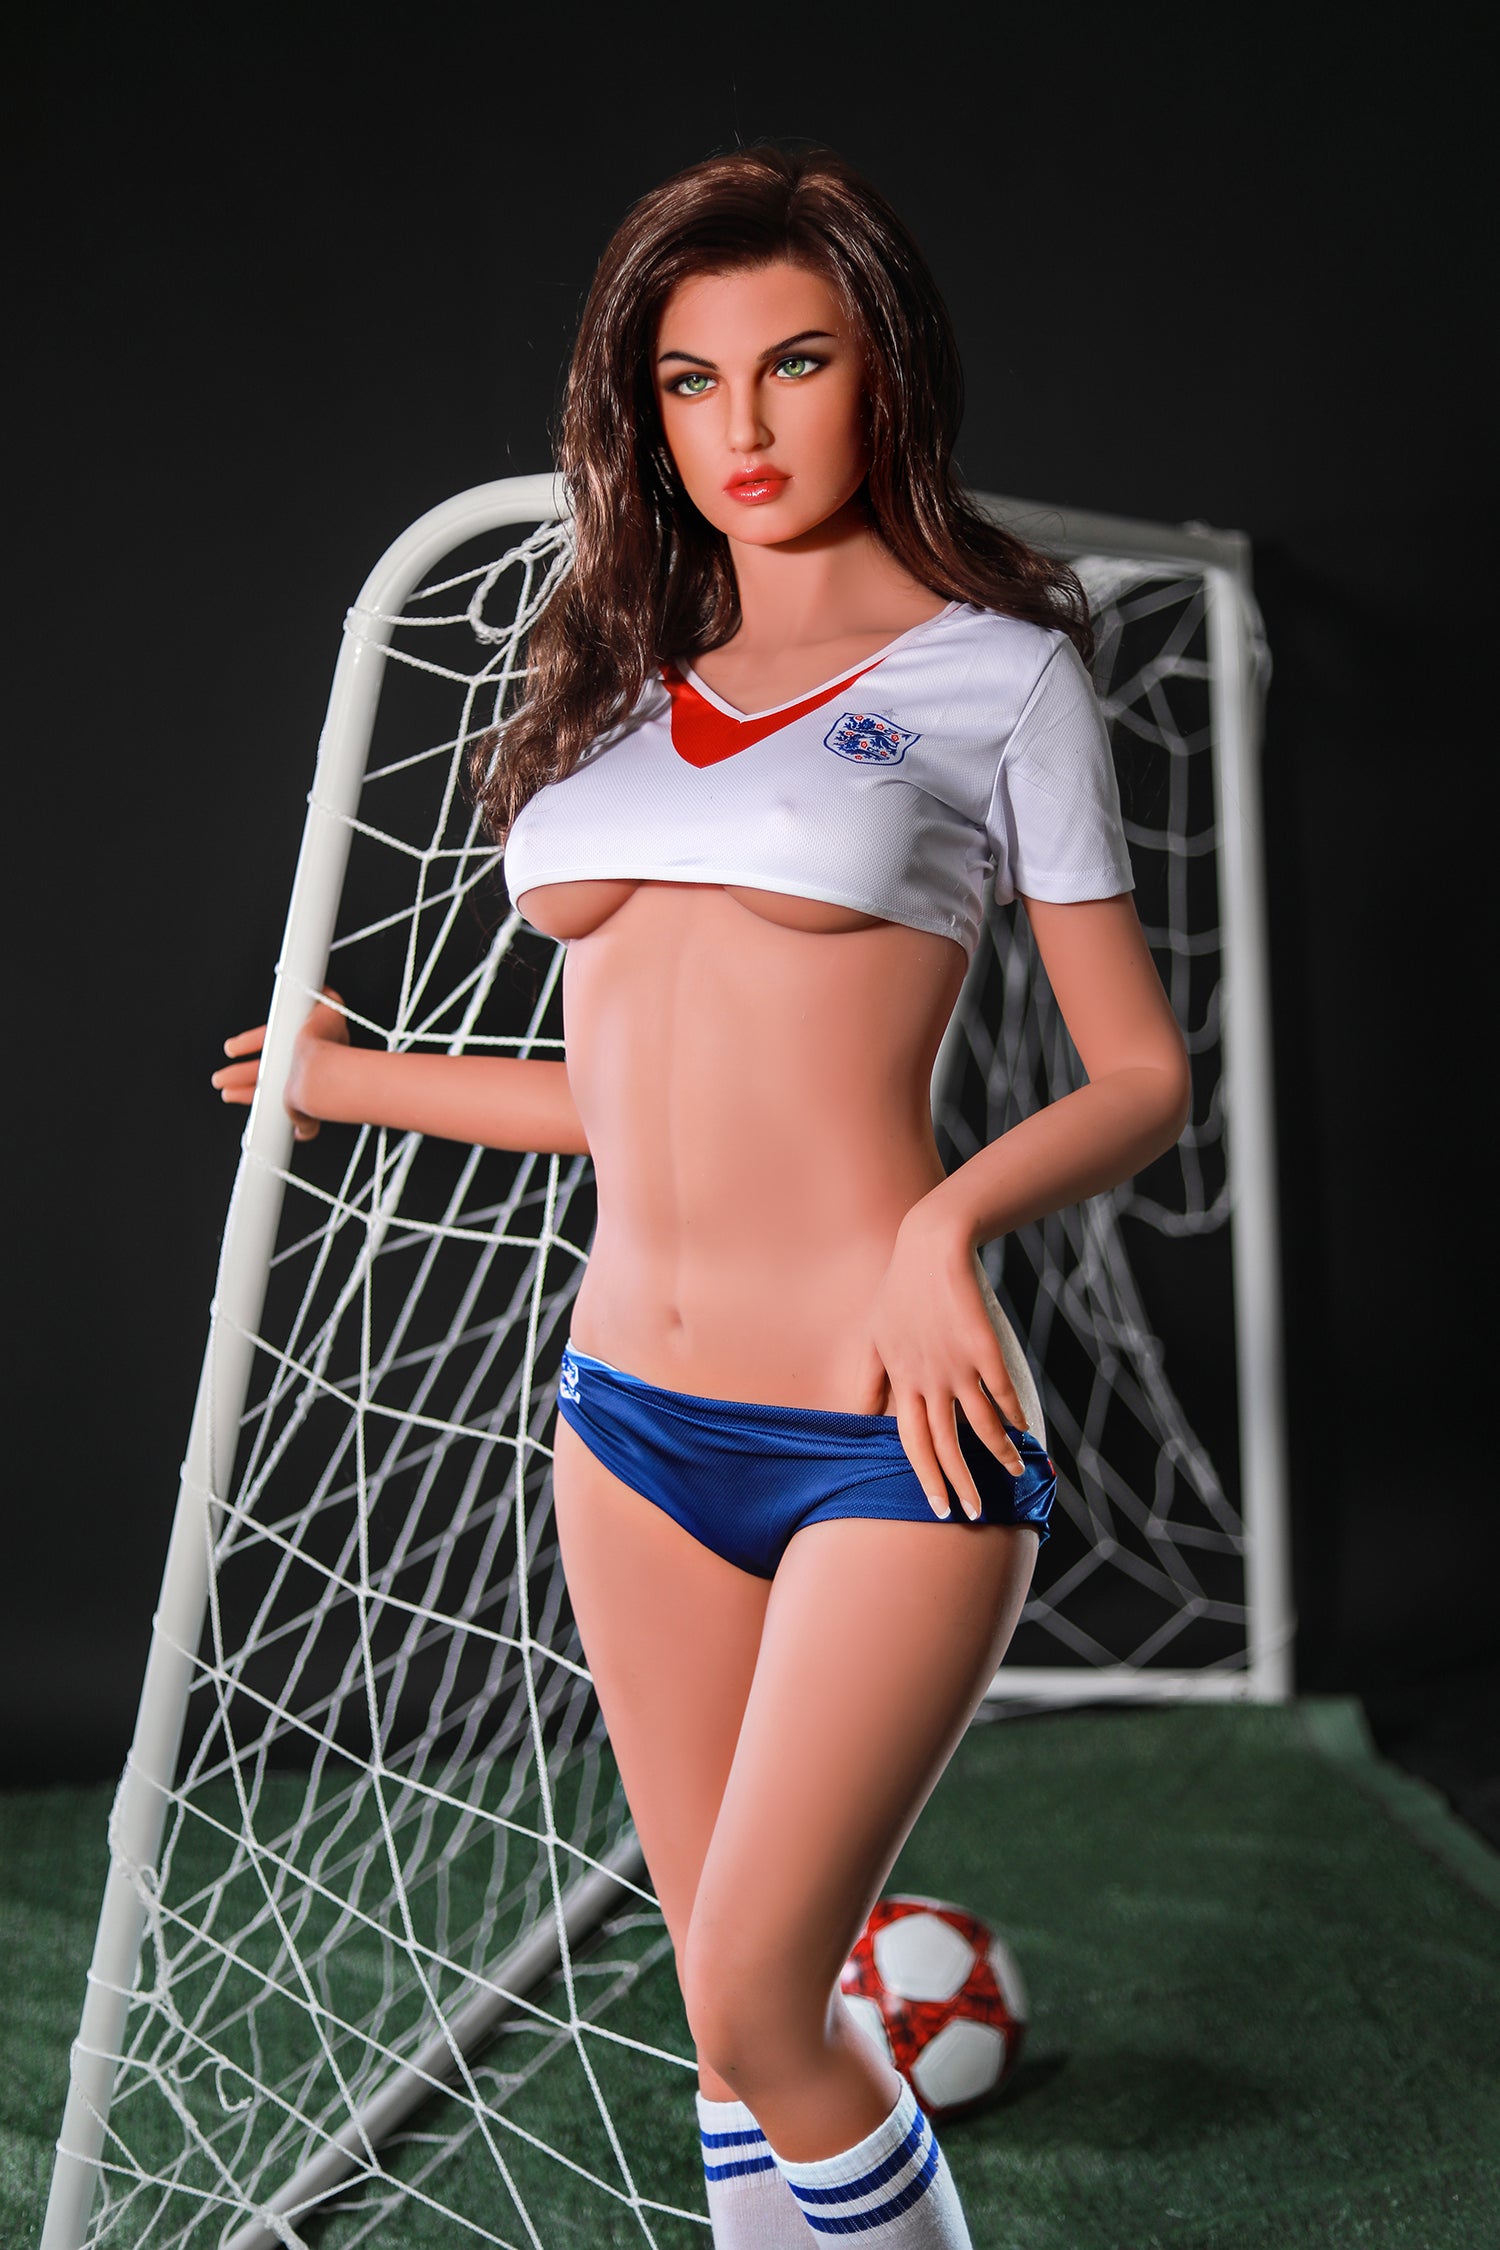 US INSTOCK SYDOLL 173cm （5ft8） #S5 C-CUP